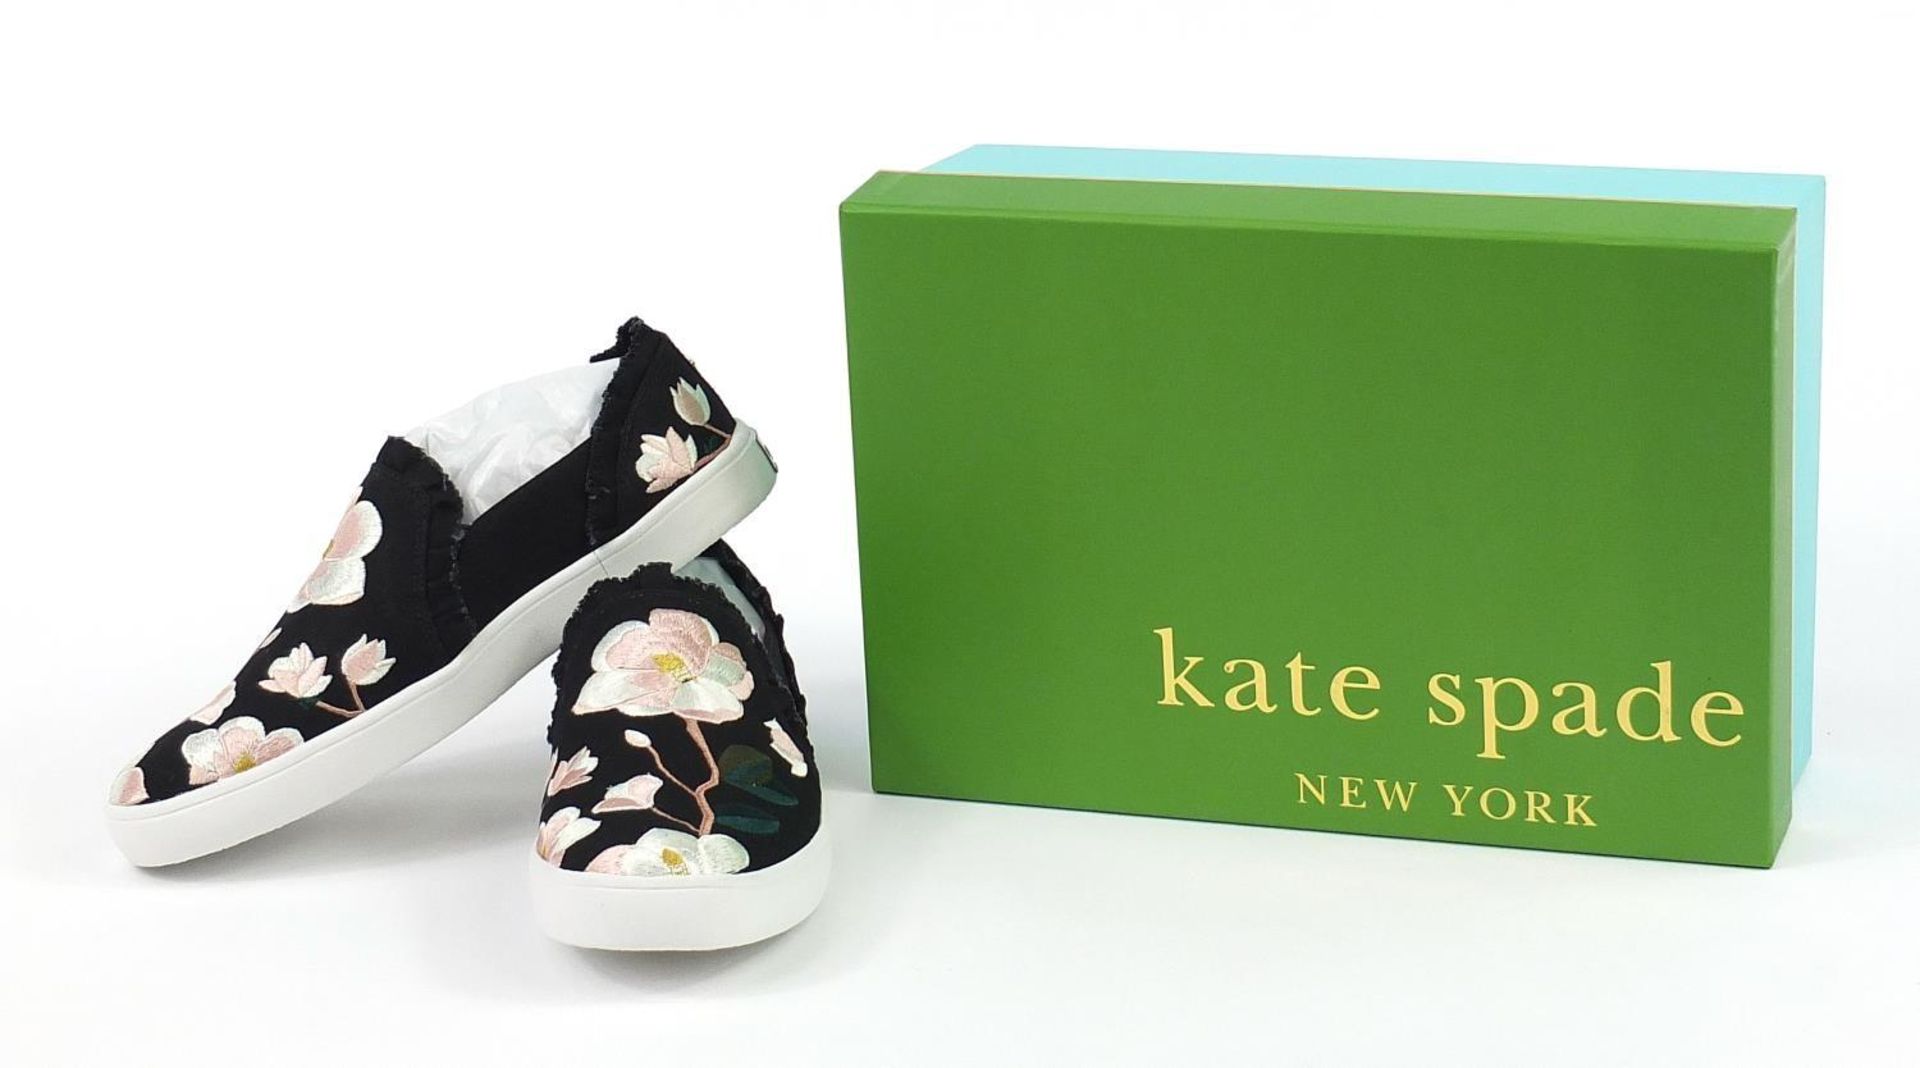 Kate Spade New York, pair of ladies' floral embroidered pumps